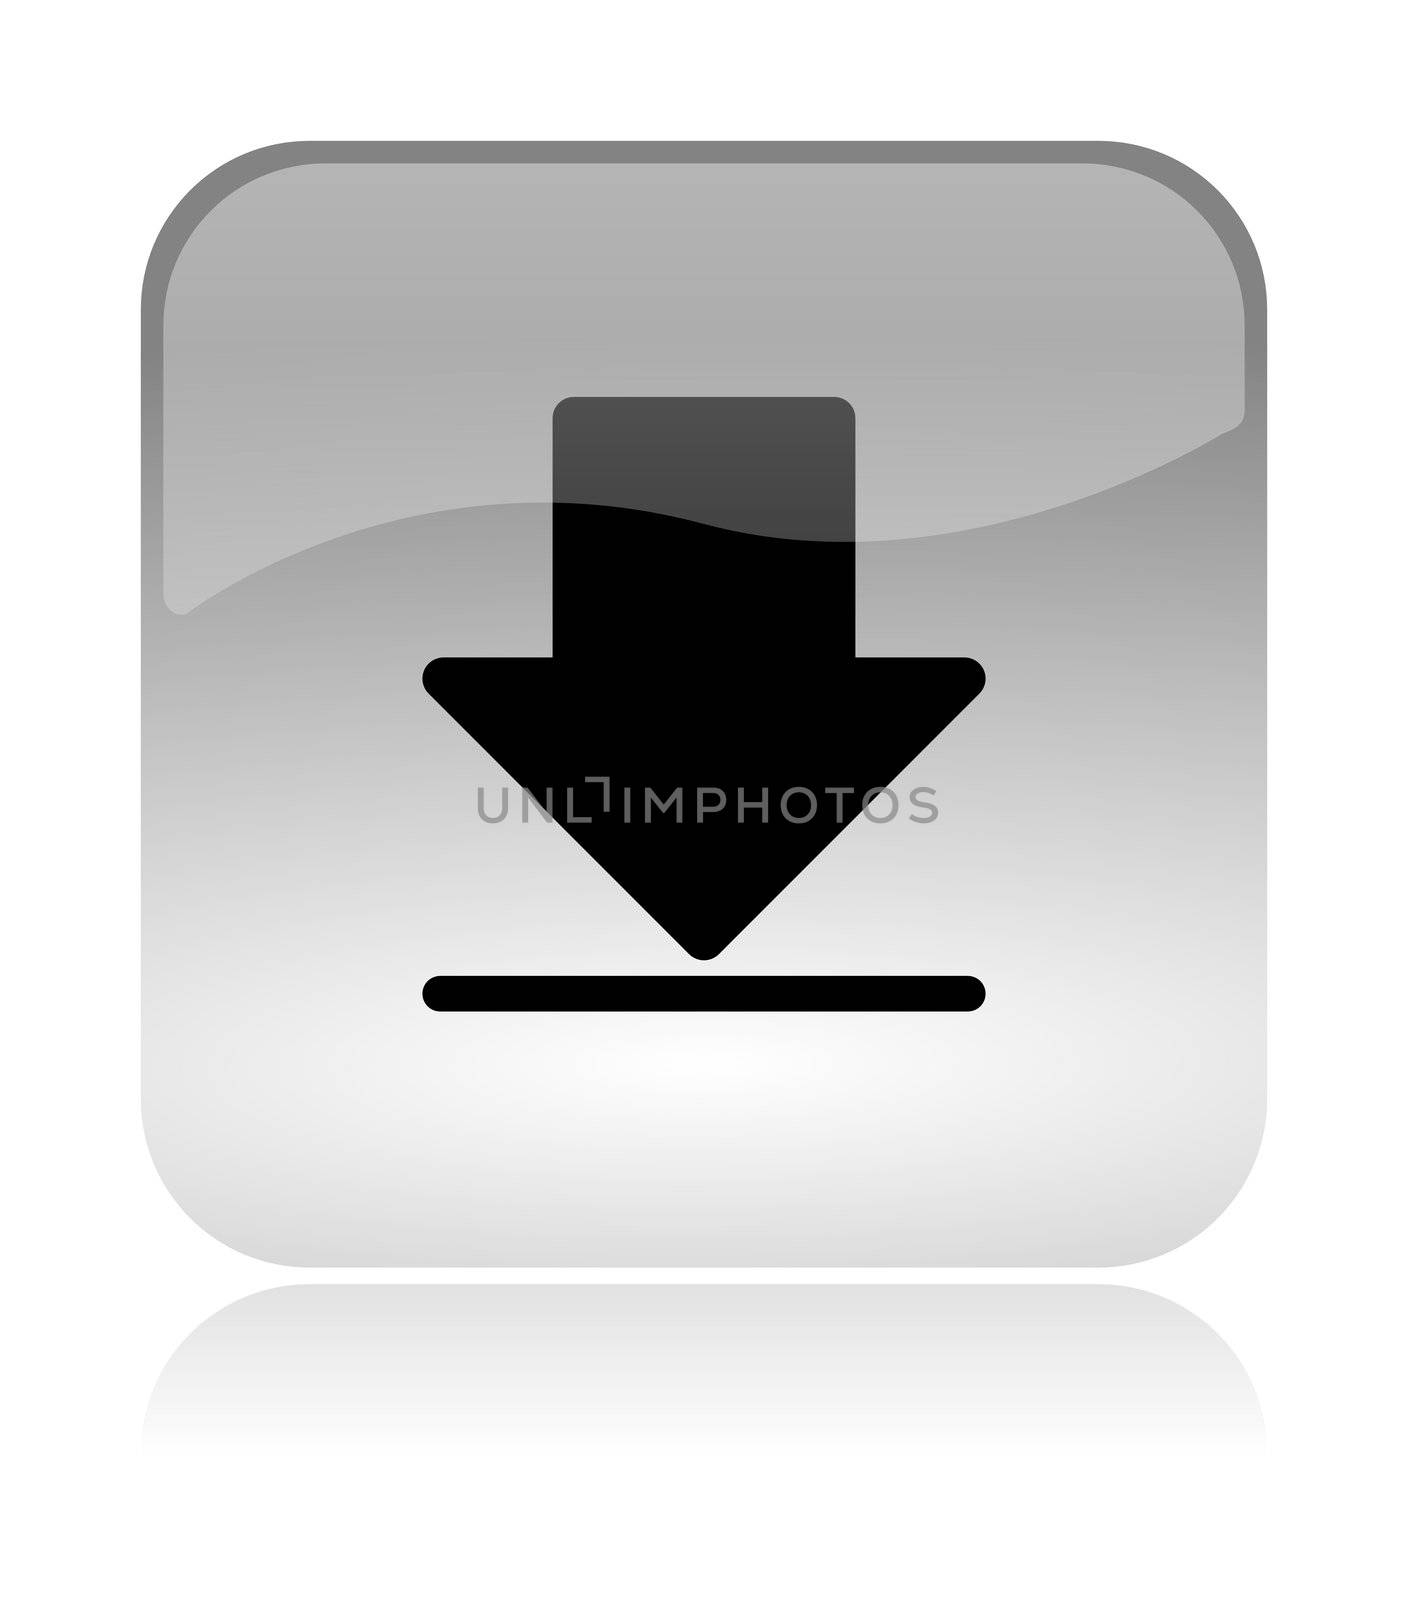 Download white, transparent and glossy web interface icon with reflection